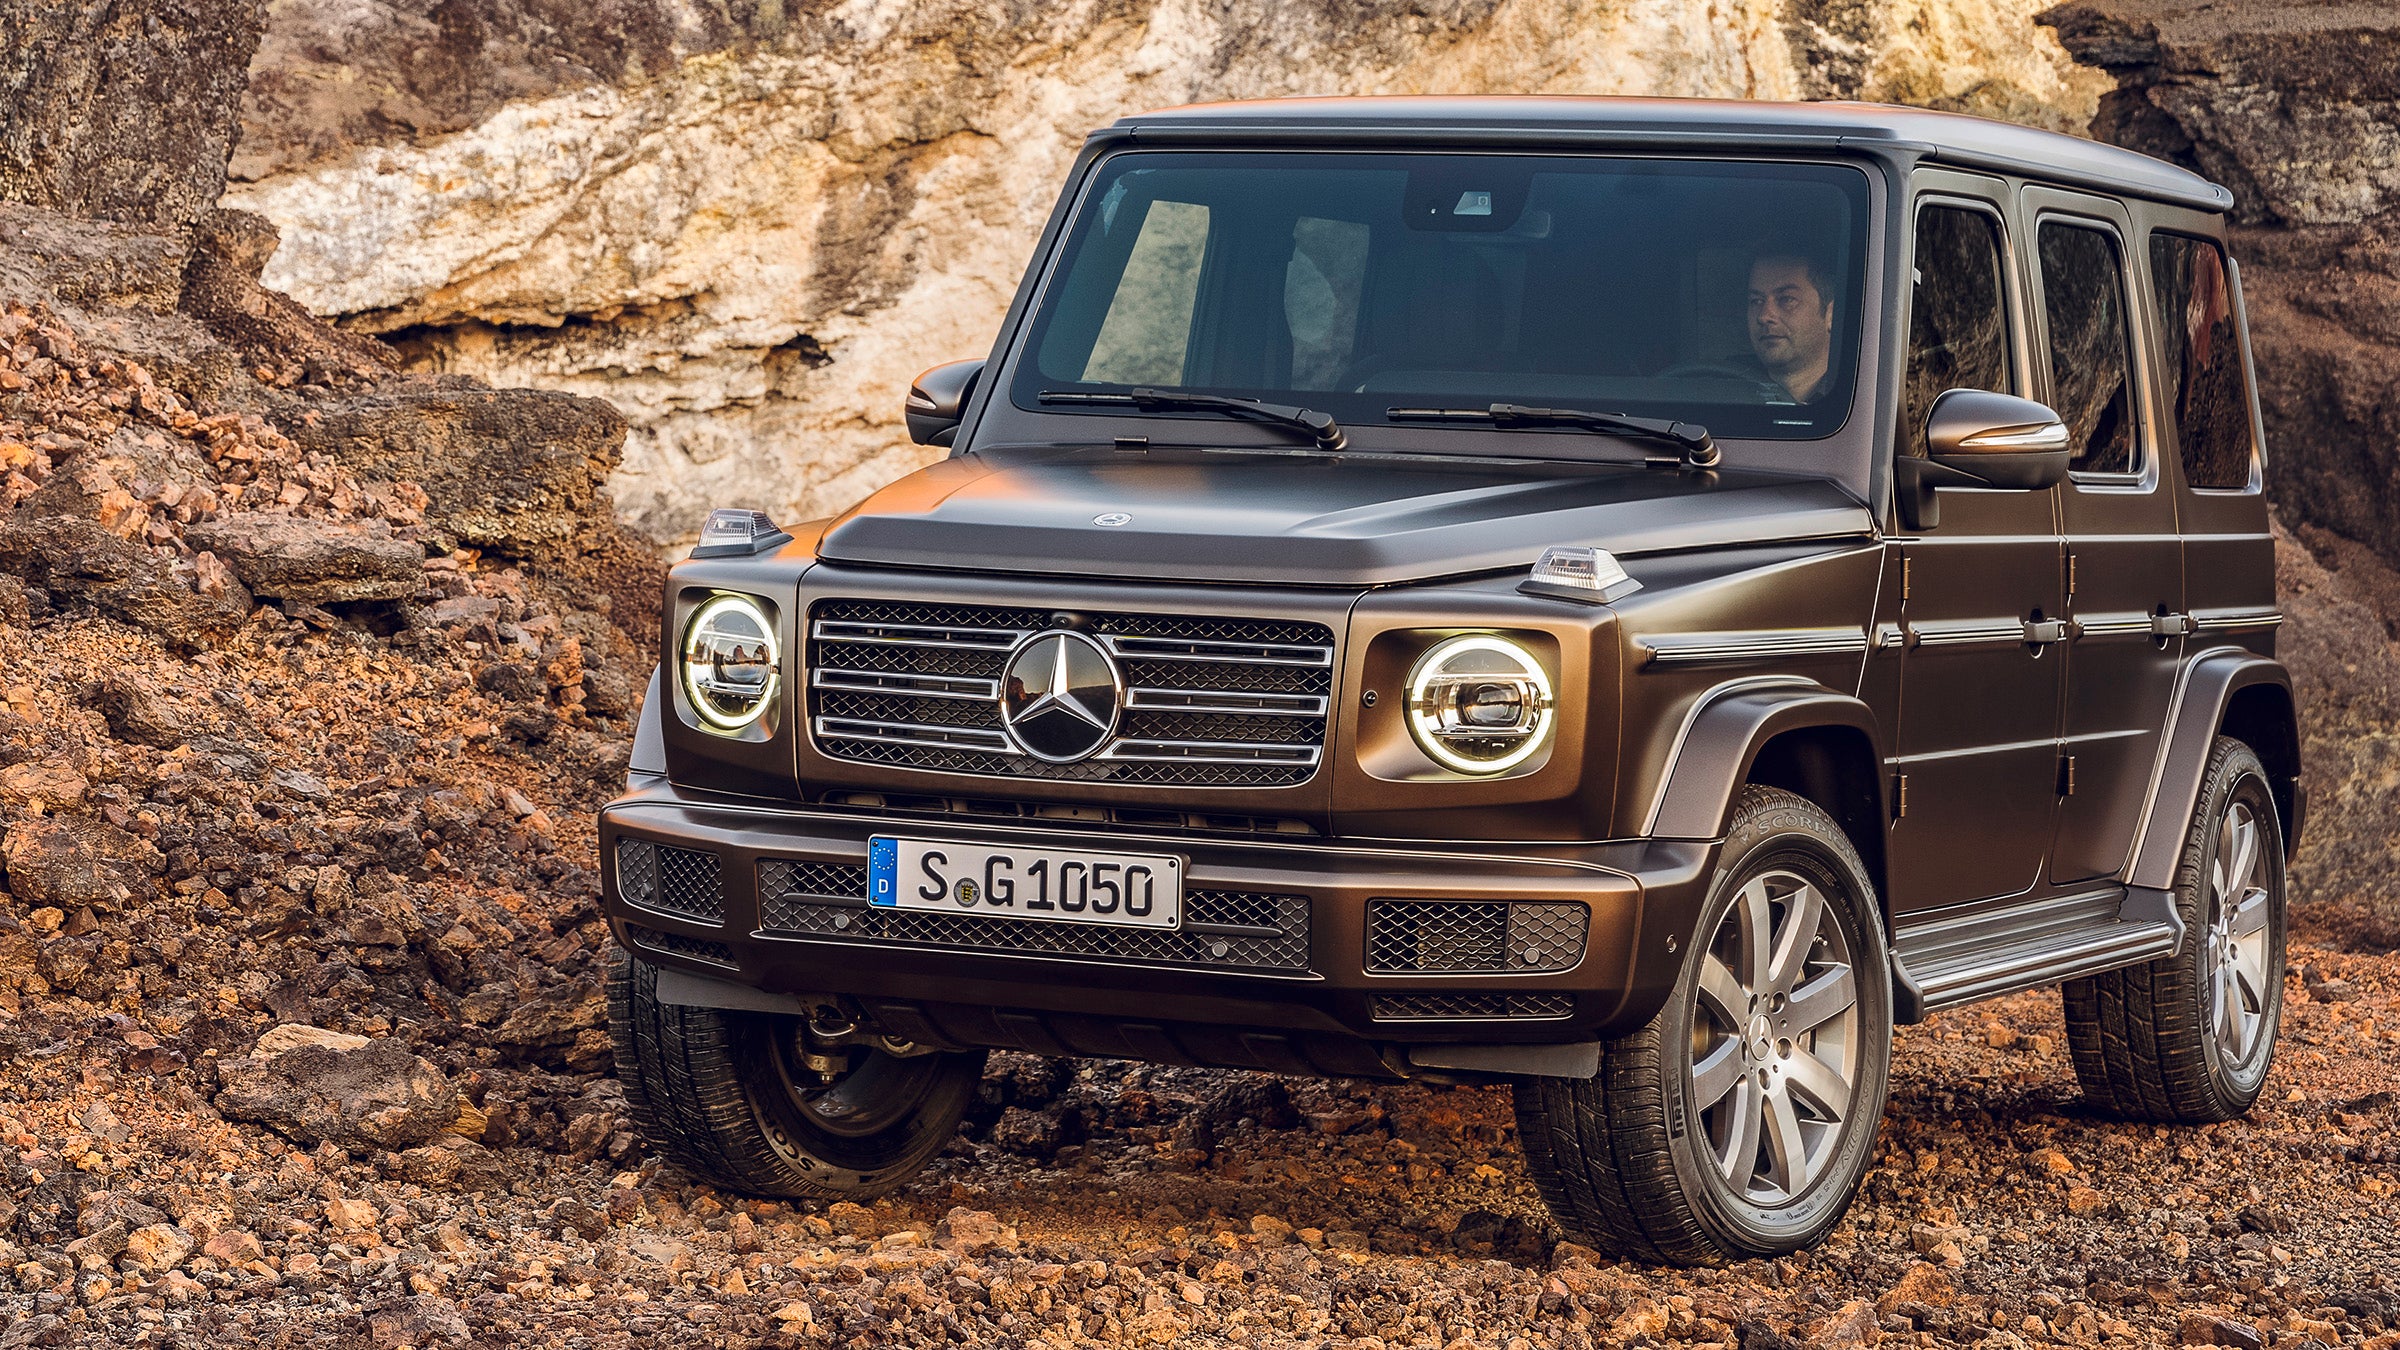 The New G-Wagen Is Less Capable—Making It Even Better